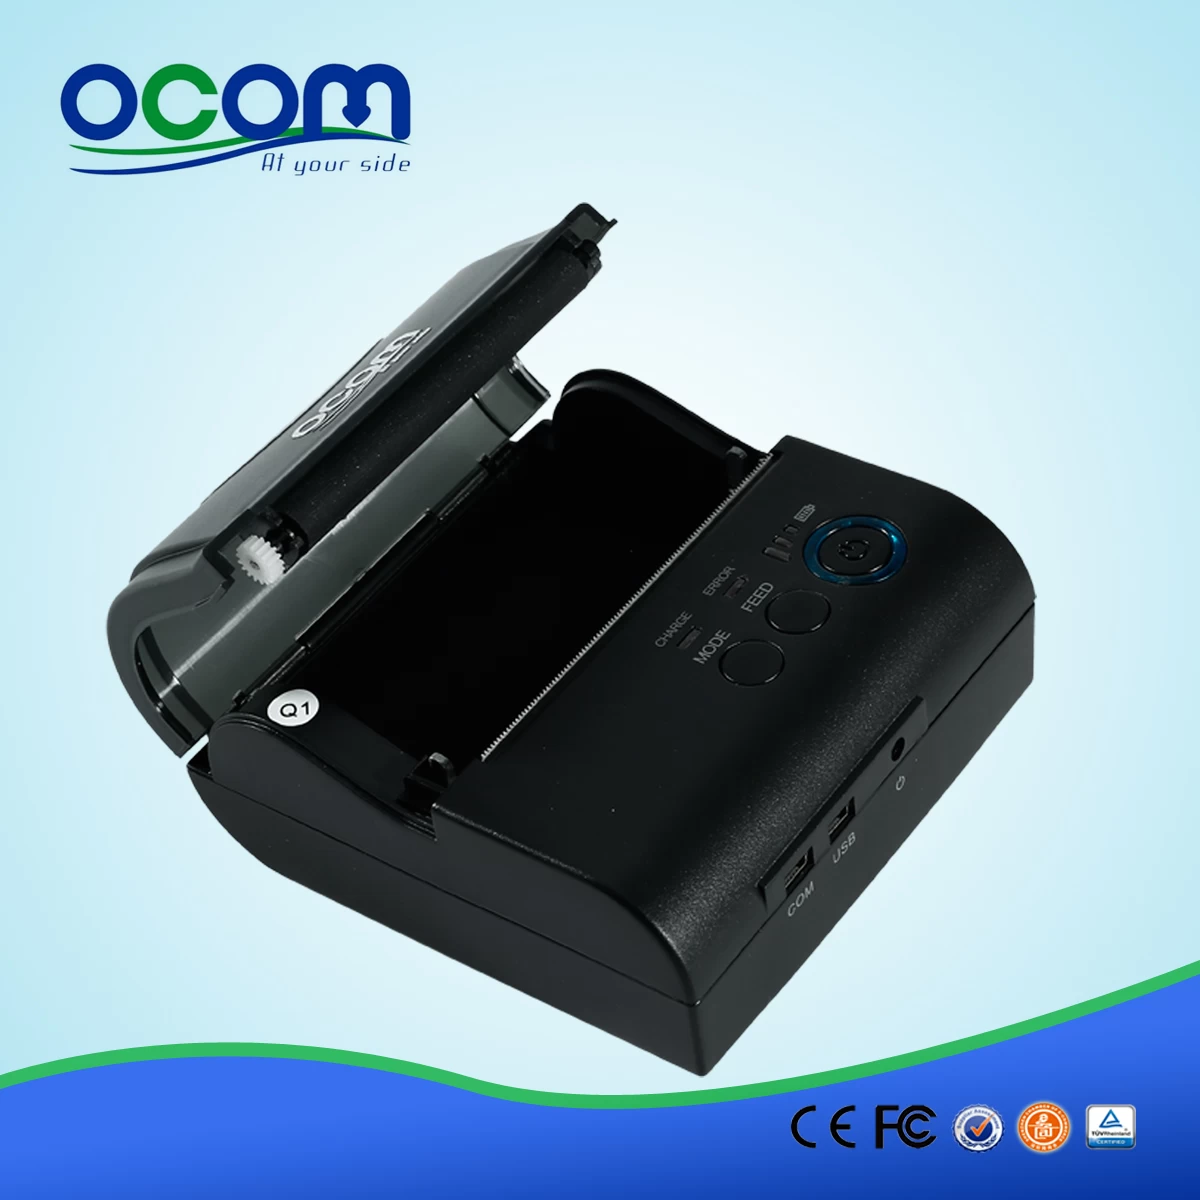 80mm Portable Bluetooth Receipt Printer for Android